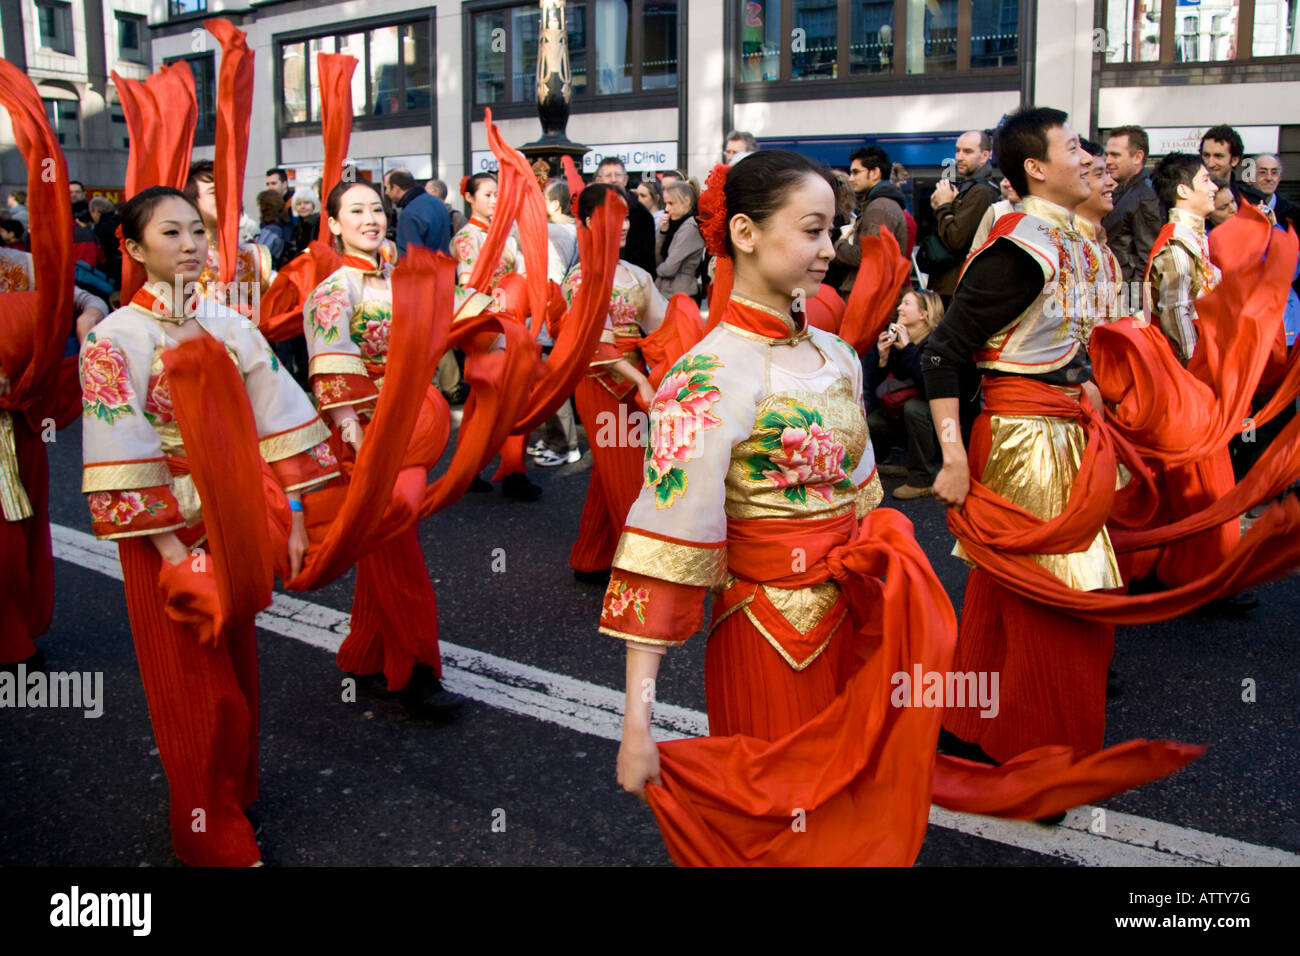 The official Chinese New Year Parade in London was held on the 10th February 2008. Stock Photo